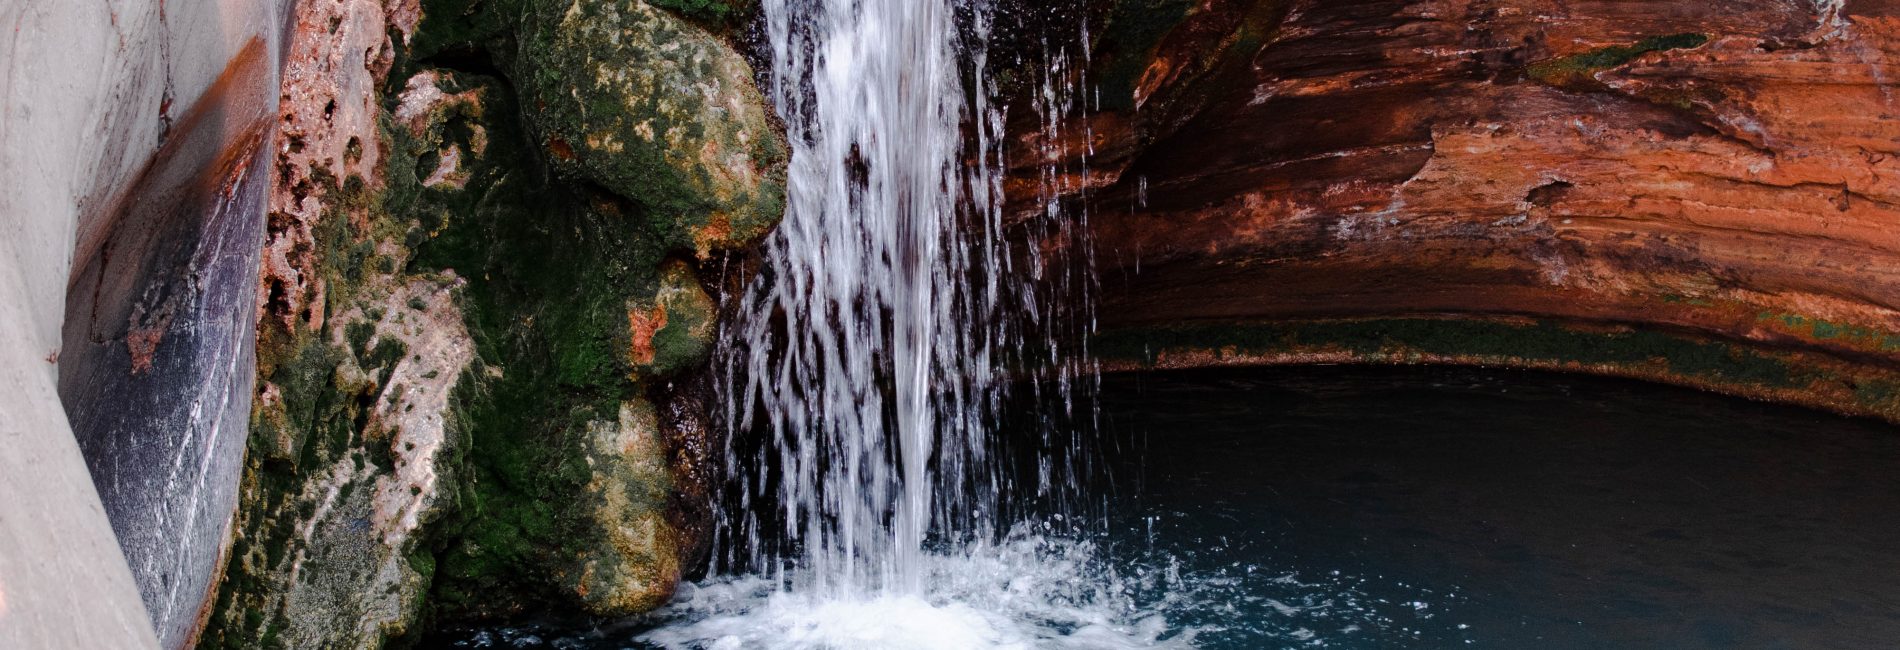 10 Best things to do in Karijini National Park